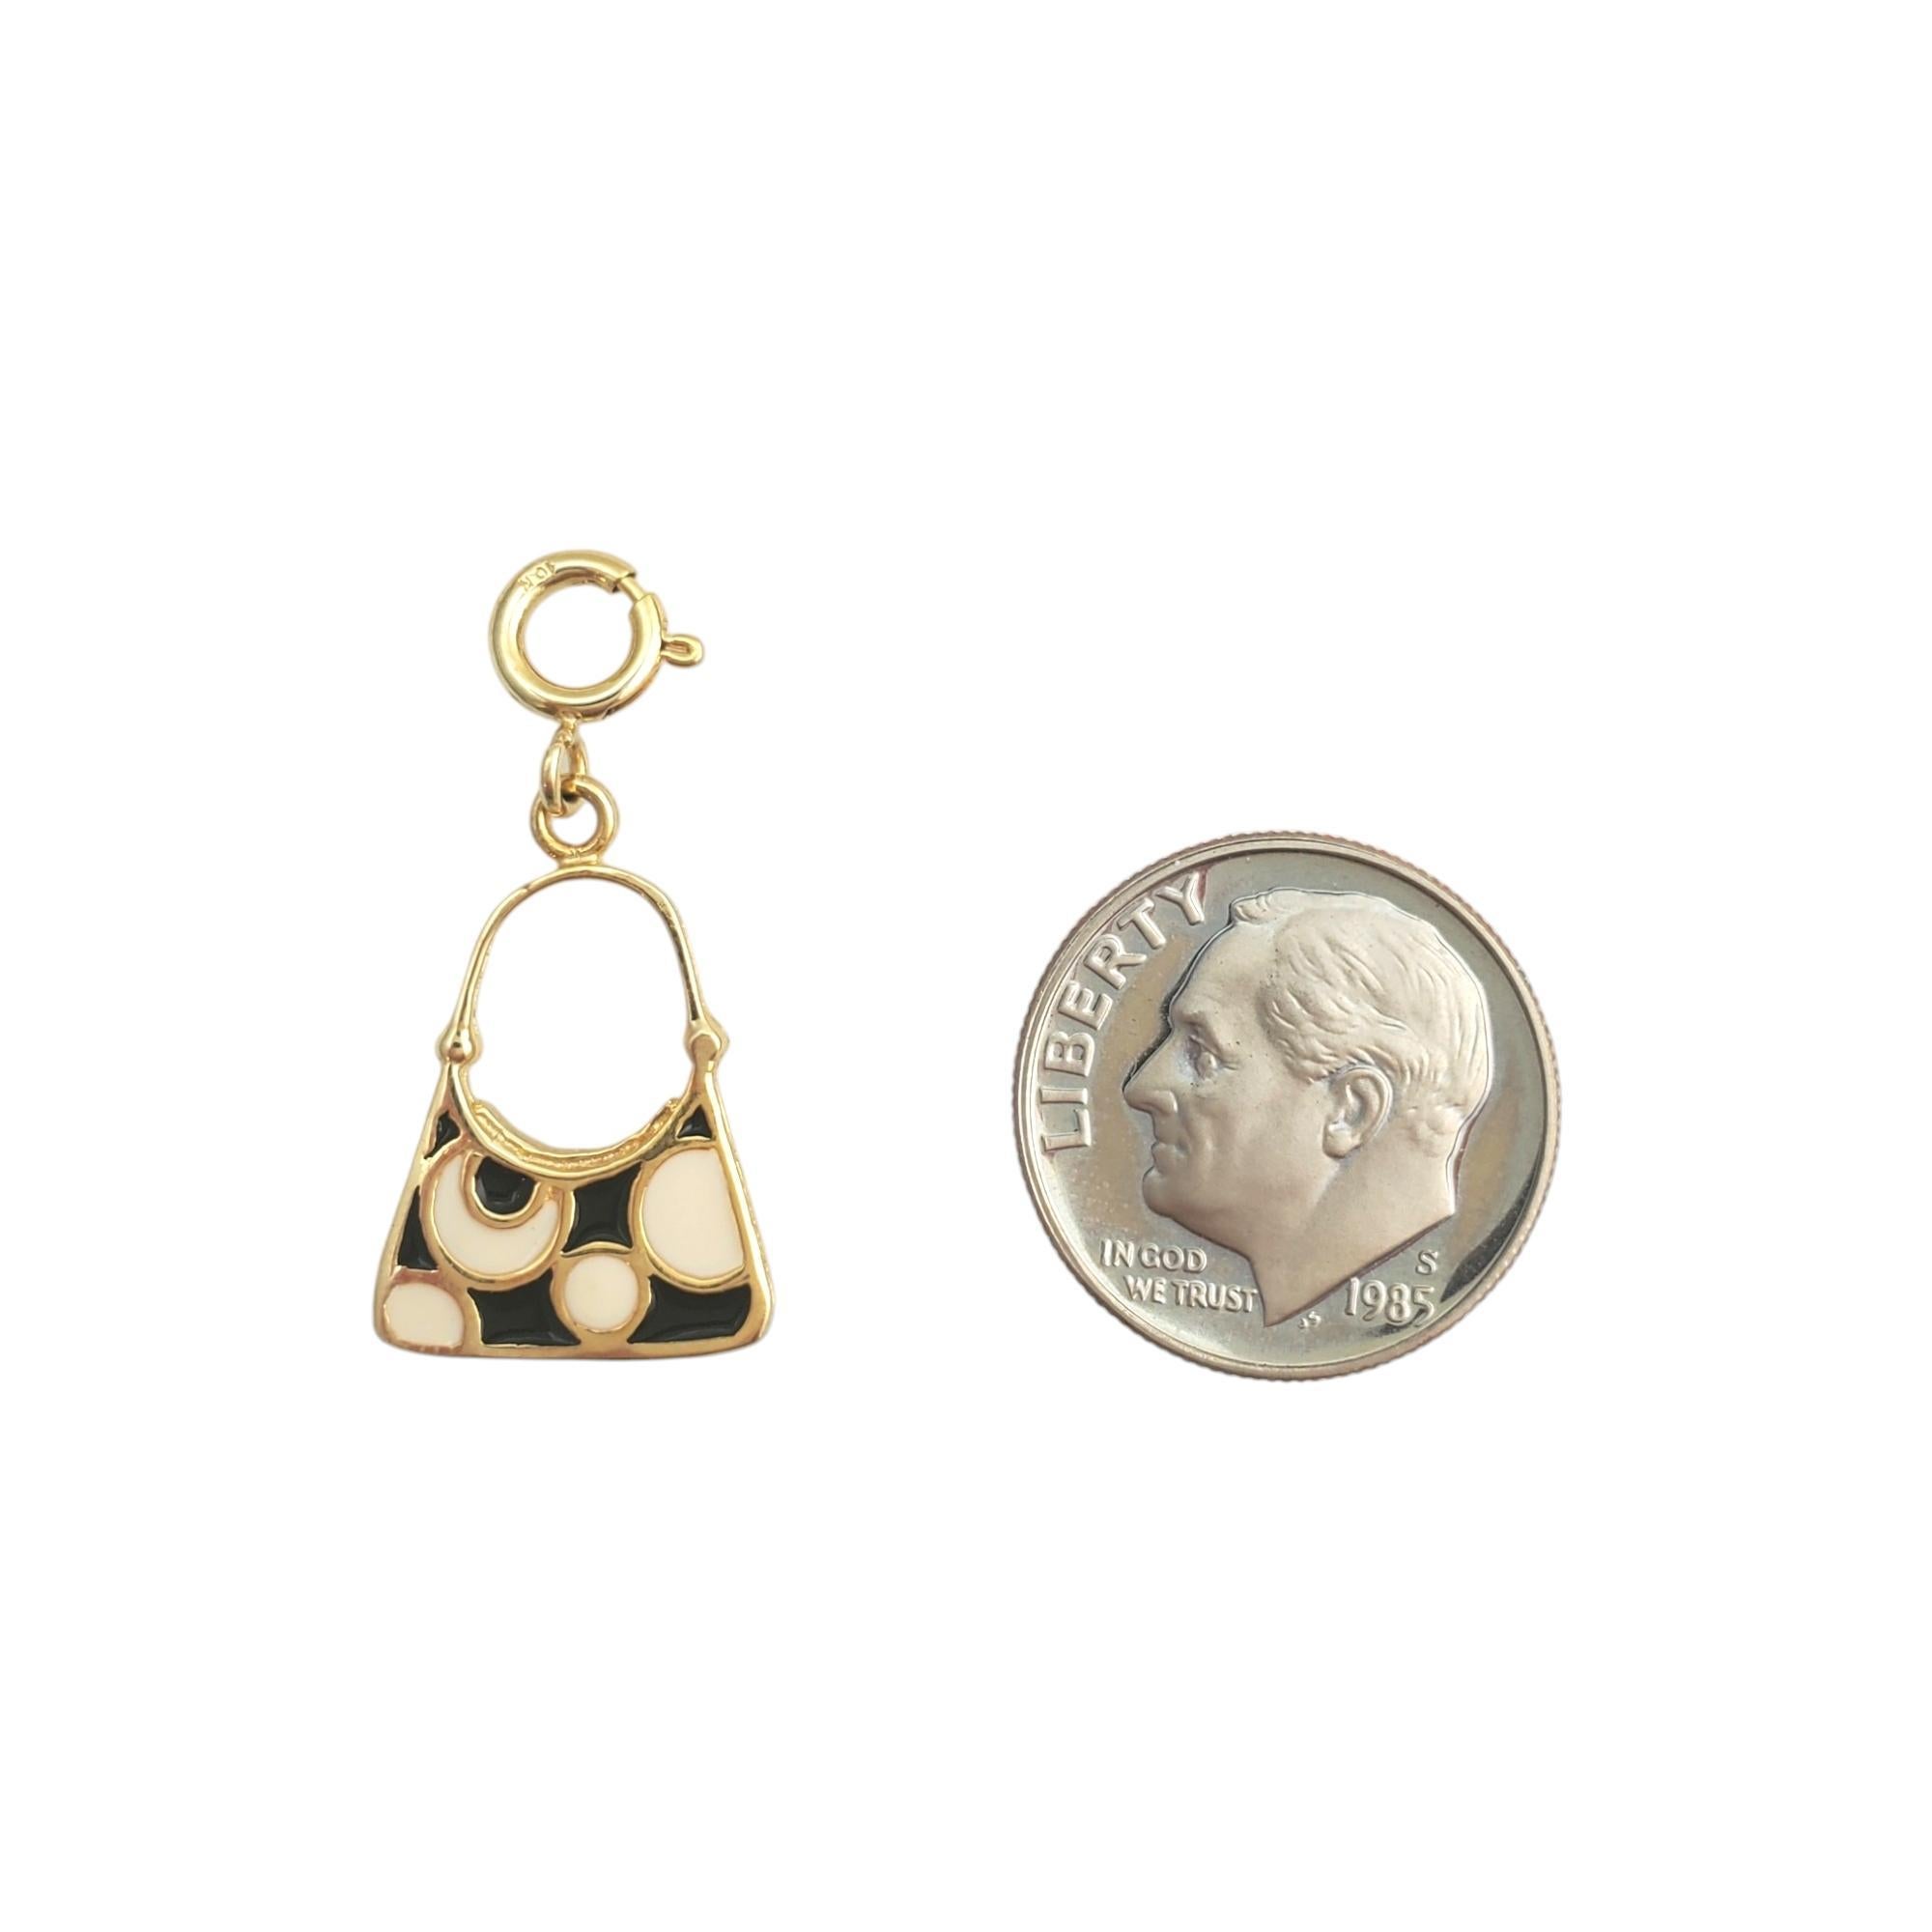 Women's 10K Yellow Gold and Enamel Purse Charm #16010 For Sale